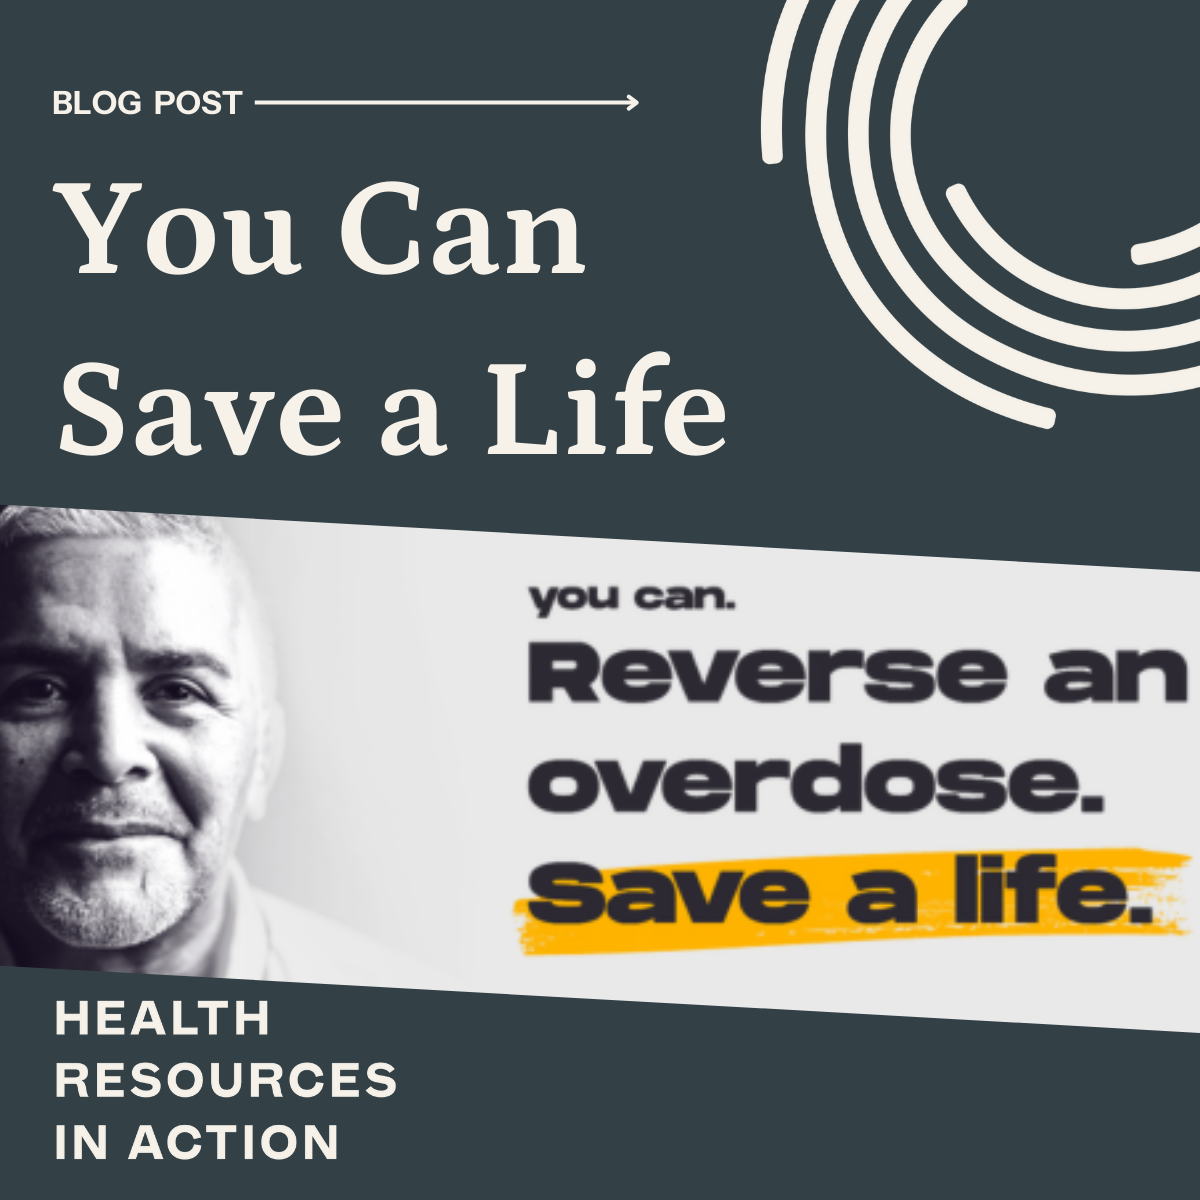 A man with a gentle smile with text: Blog post - You Can Save a Life. Reverse an overdose. Save a life. 91Ů.